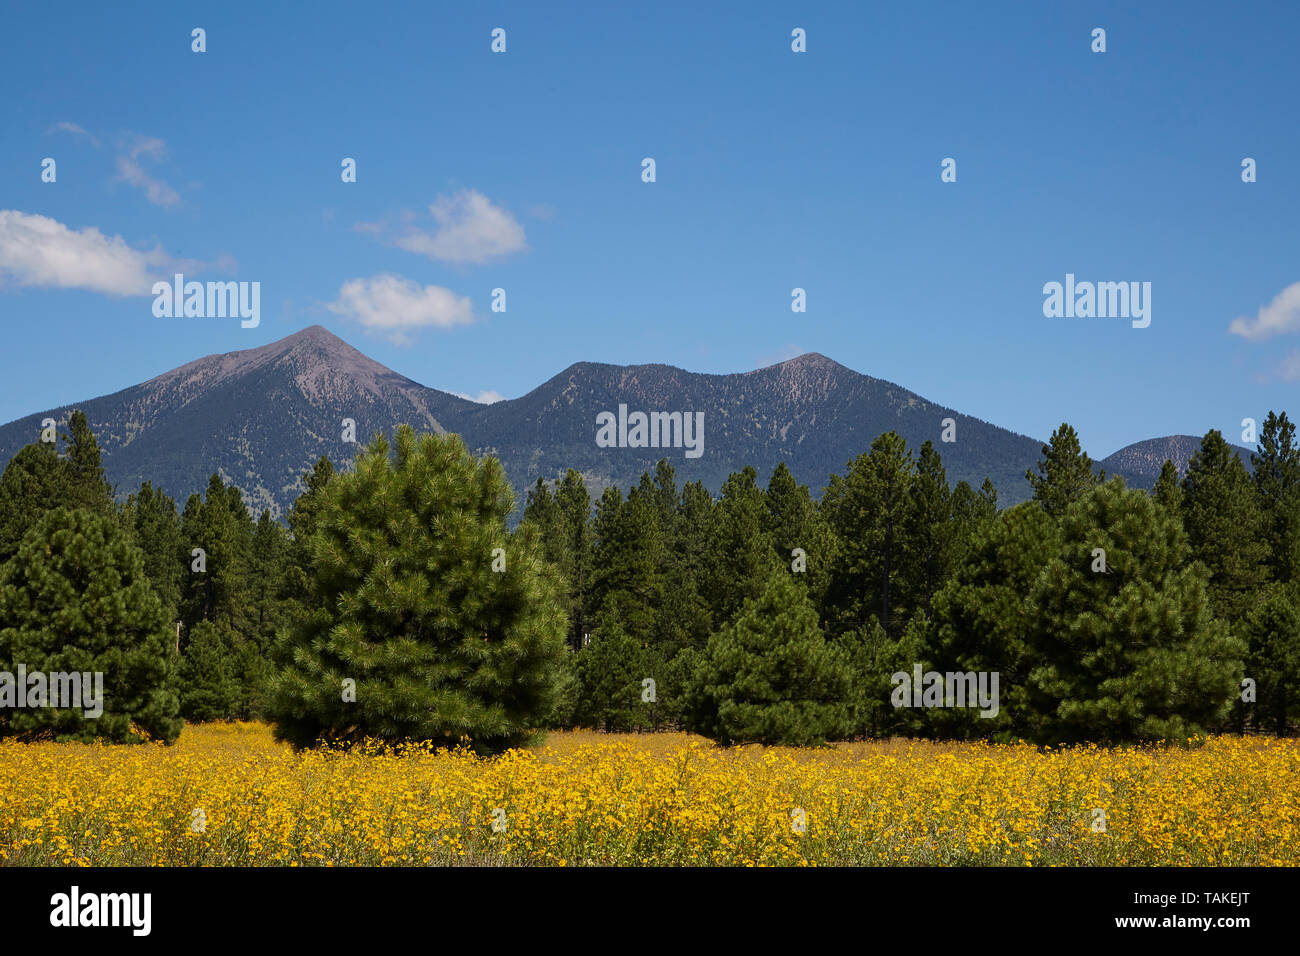 Field of yellow flowers with blue sky, mountain, and pine trees in background. Stock Photo